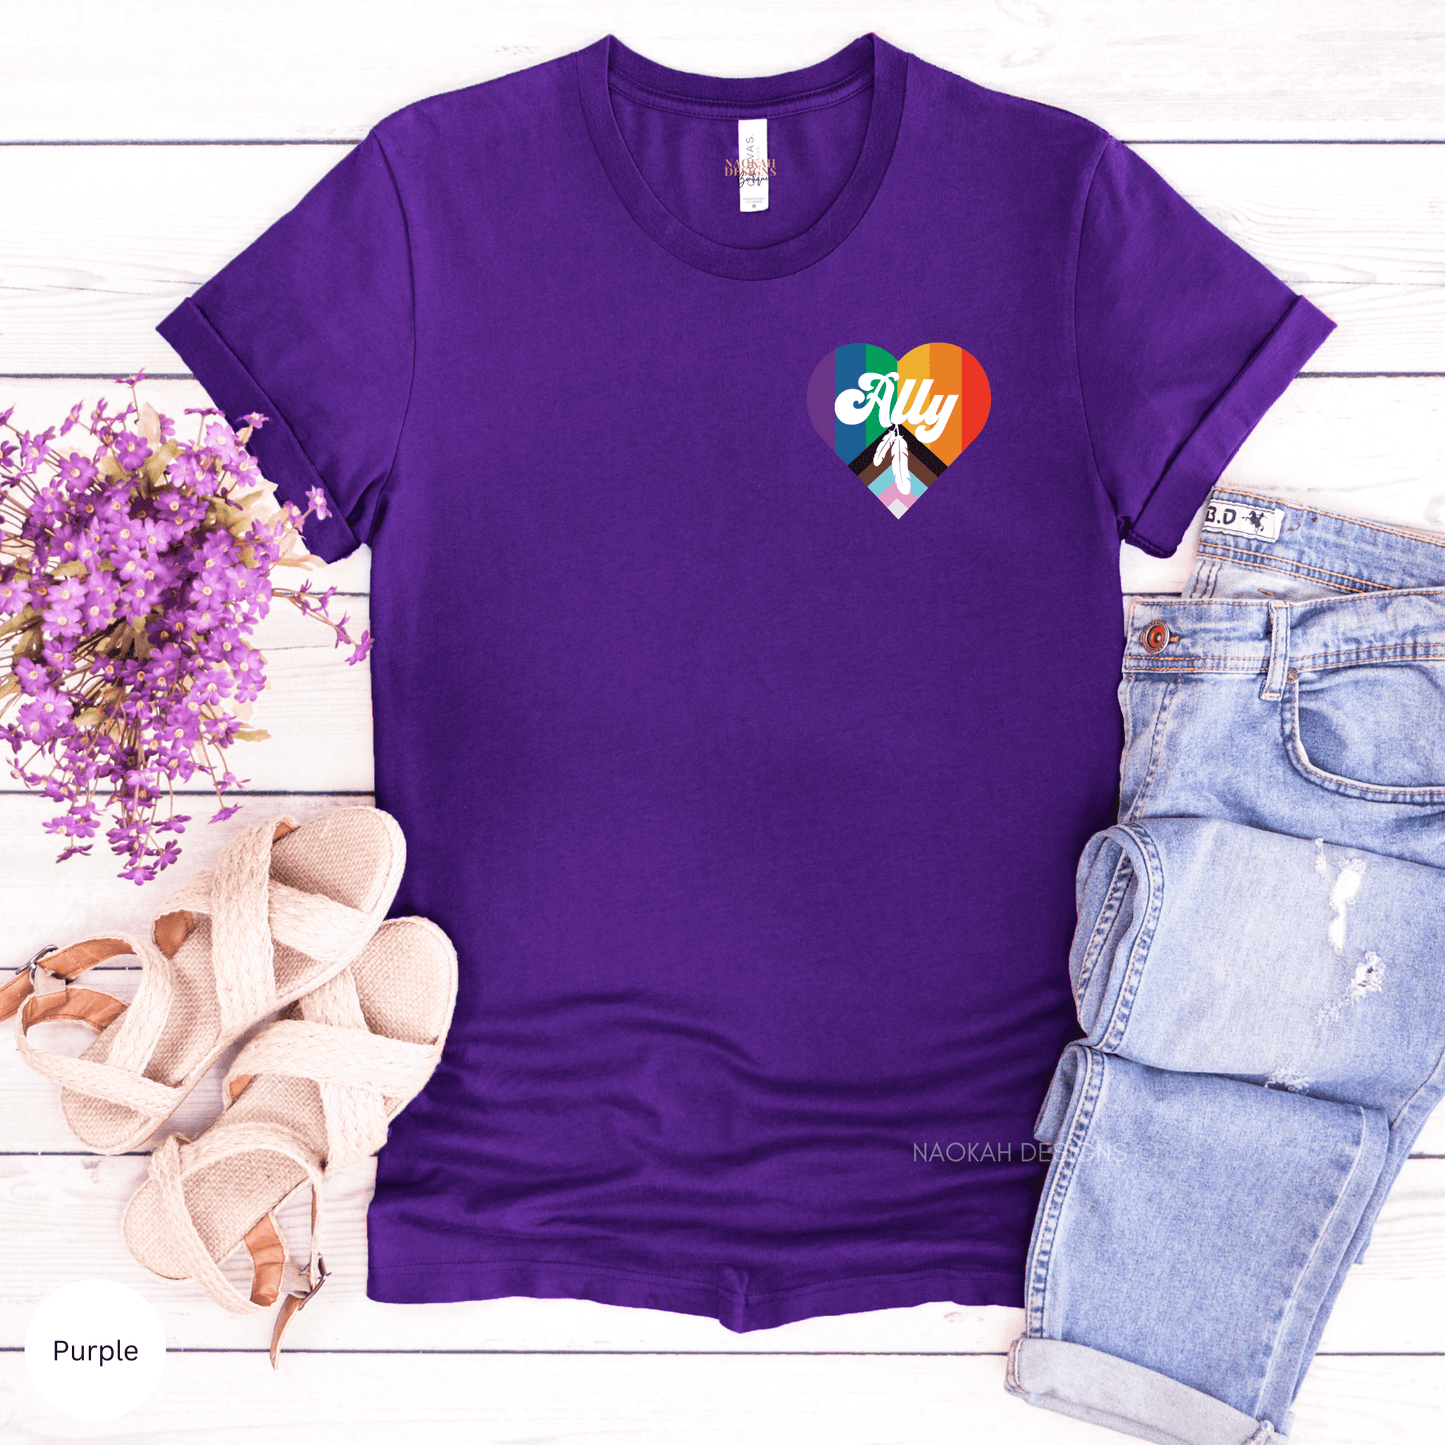 Pride Ally shirt, Two-Spirit Ally Shirt, Indigenous Owned Shop, Love is Love, Equality Shirt, Rainbow, You Are Safe With Me, LGBTQ2S+ Ally